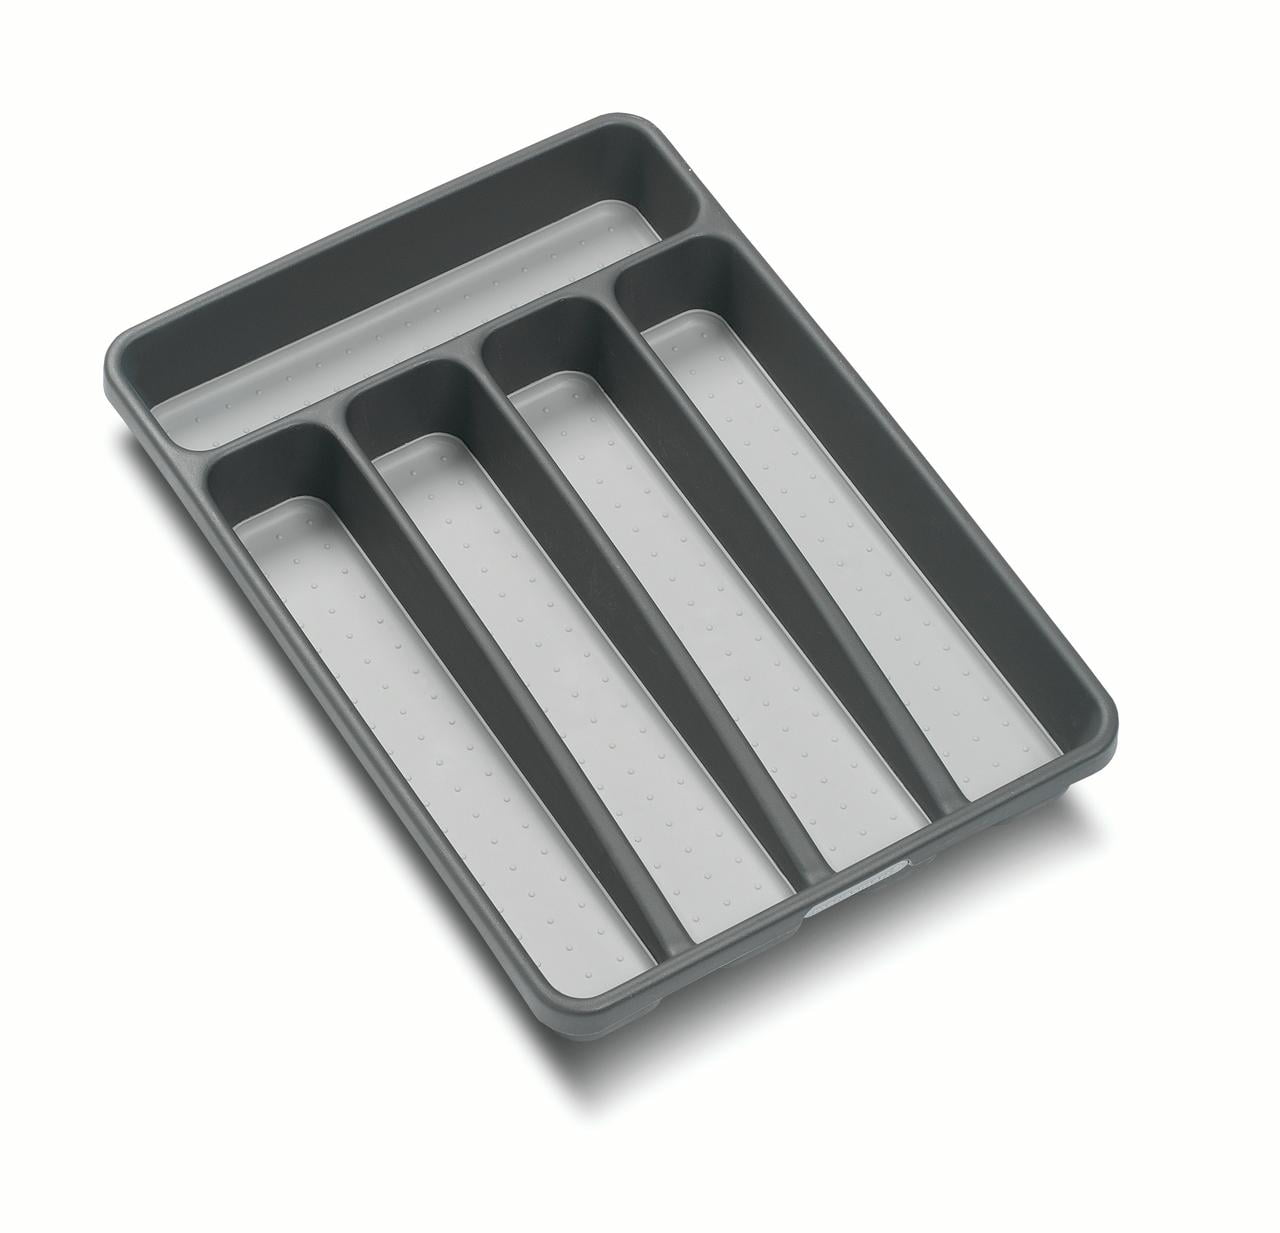 Granite Madesmart 2 by 16 by 13-1/4 to 21-1/4-Inch Expandable Utensil Tray